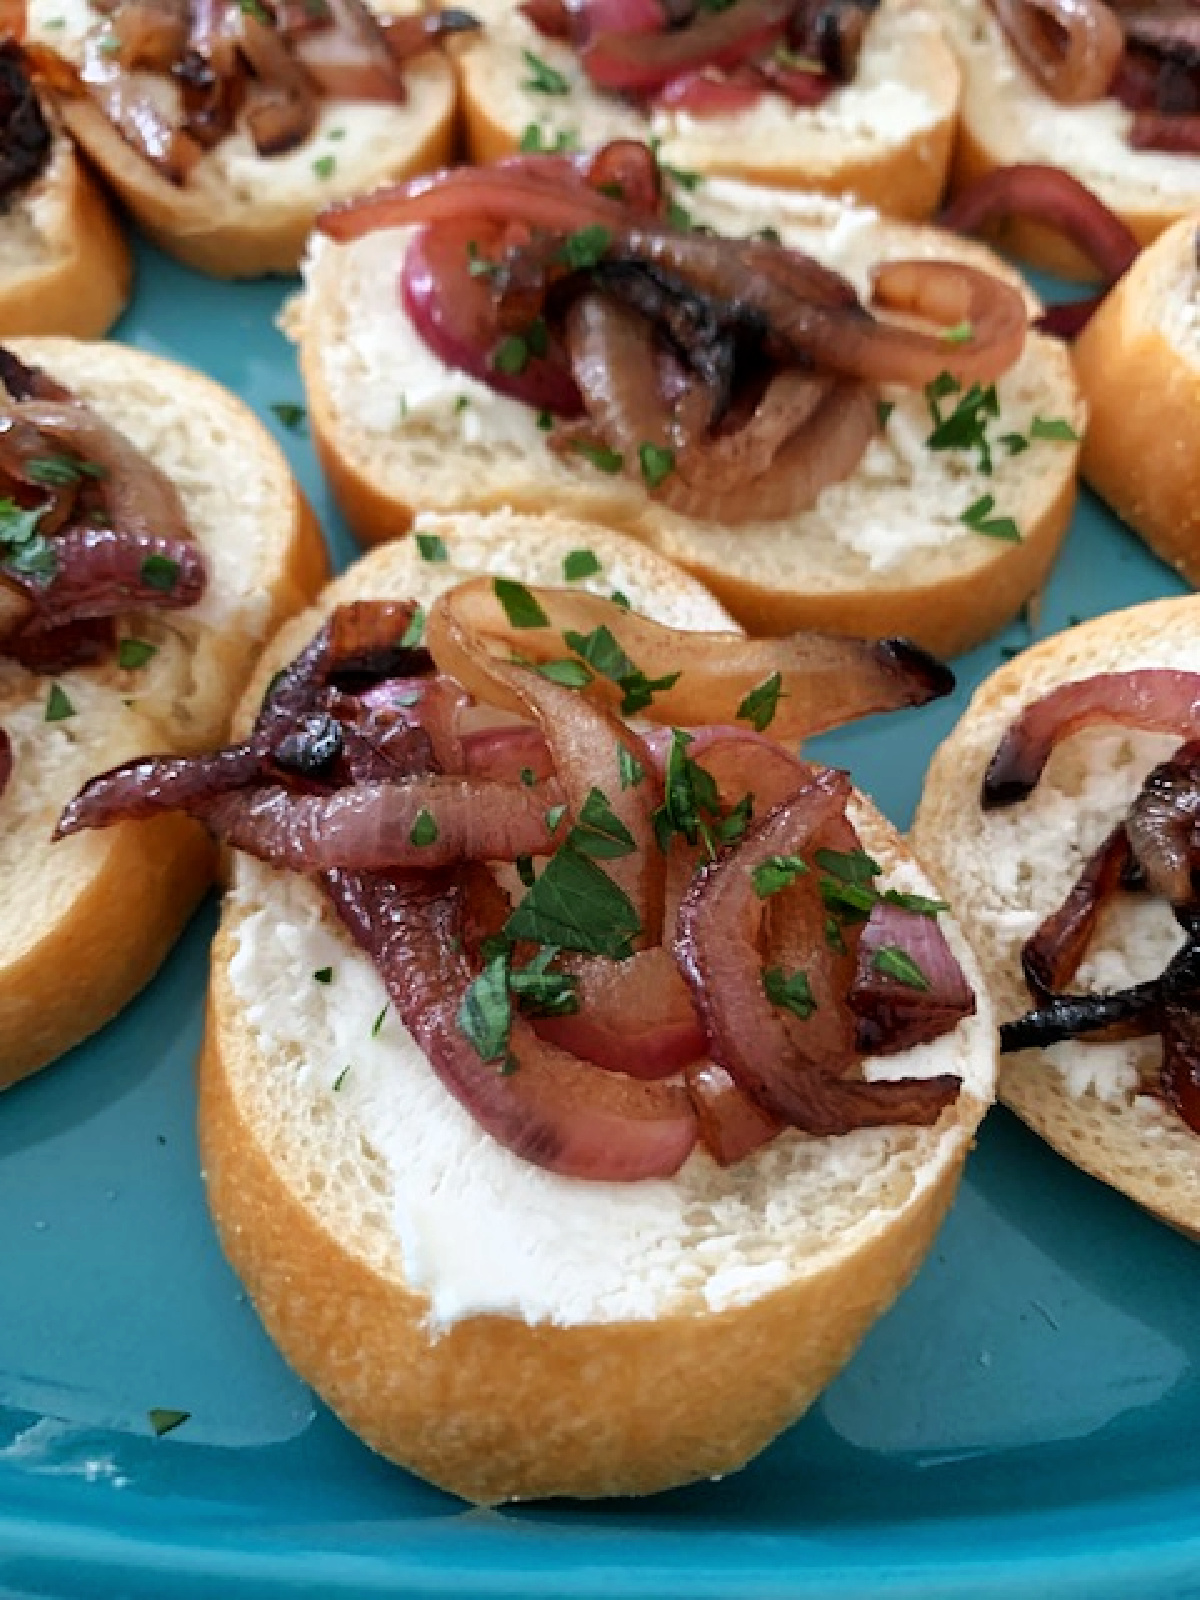 Caramelized onion and cheese canape on a serving platter.